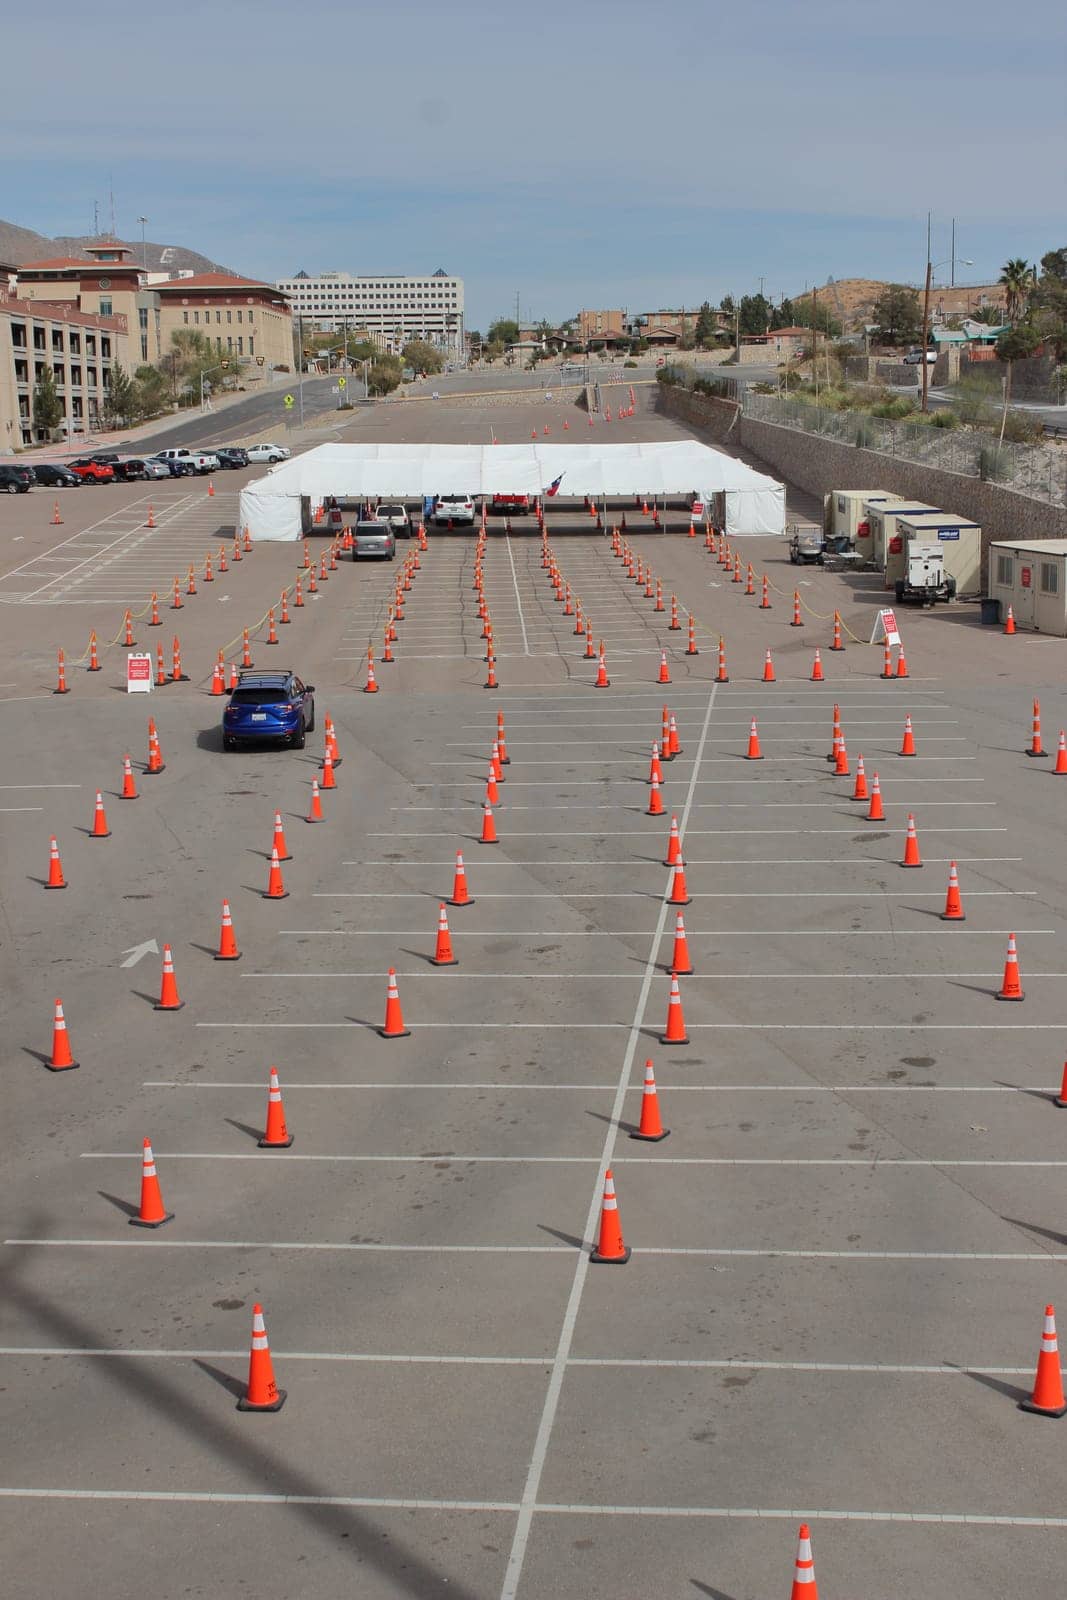 A COVID-19 state drive-thru testing site at UTEP, in El Paso, Texas, Oct. 26,2020.